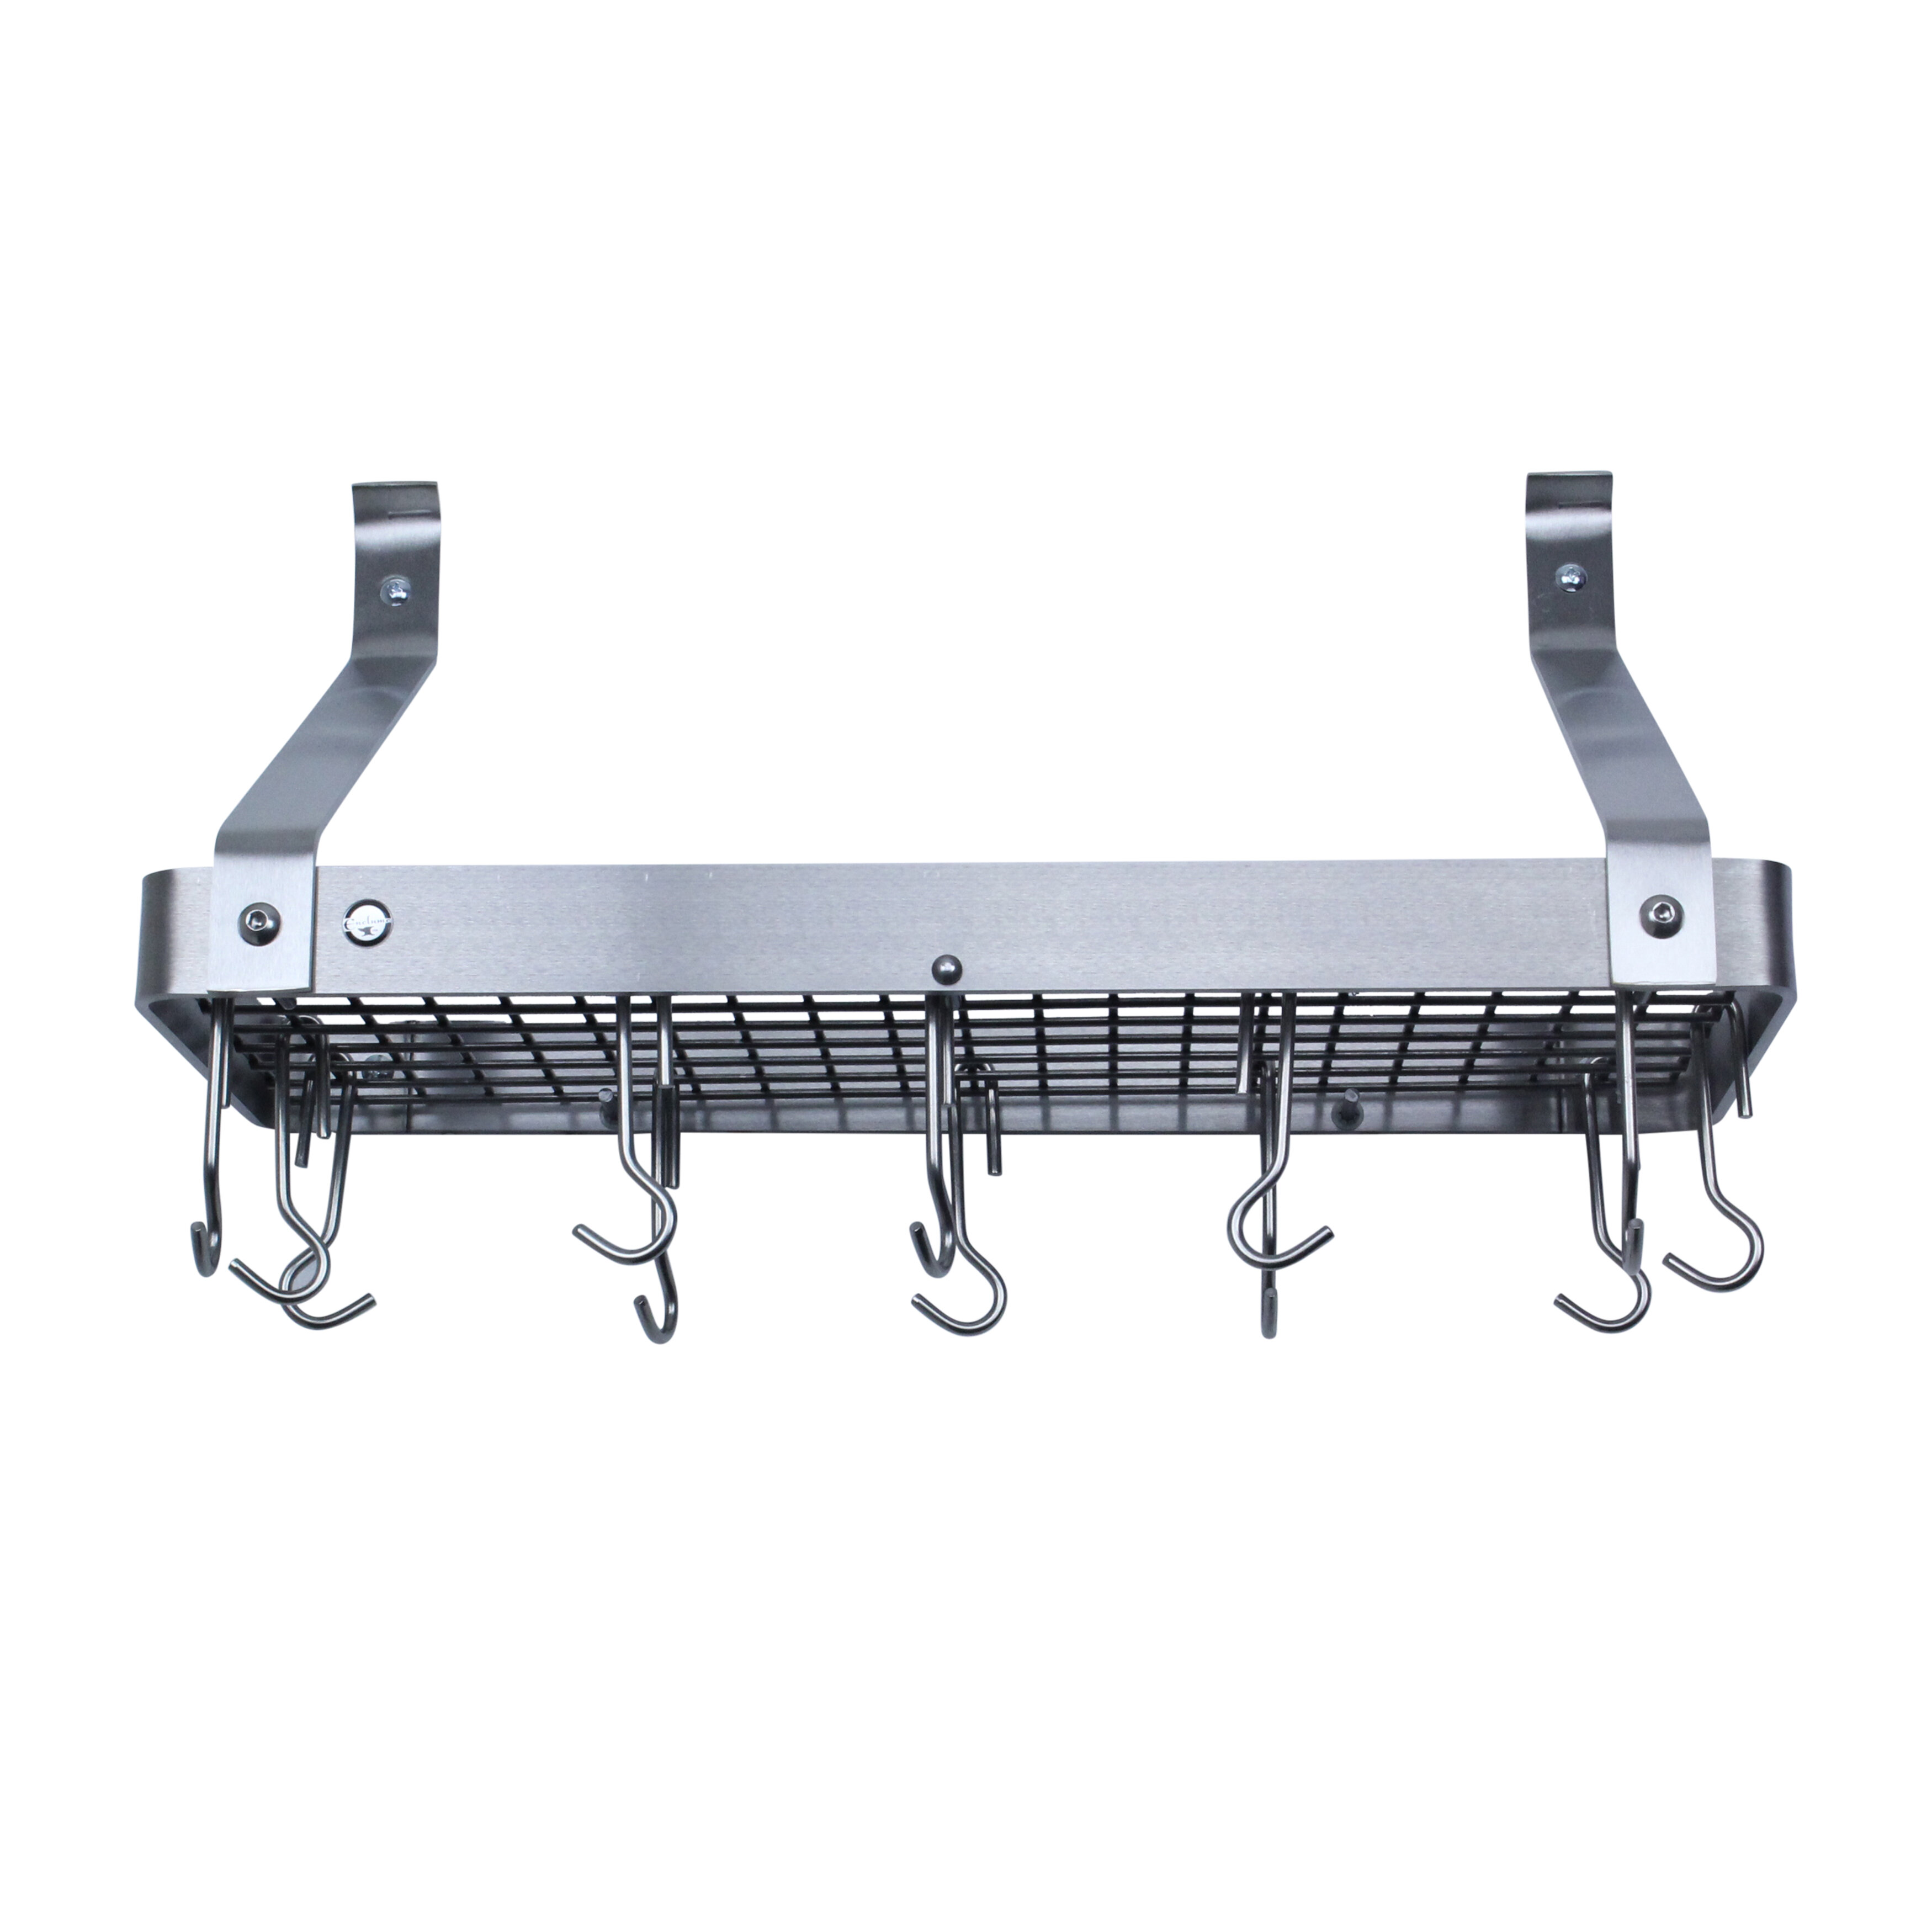 Enclume Handcrafted Gourmet Stainless Steel Wall Mounted Pot Rack Perigold